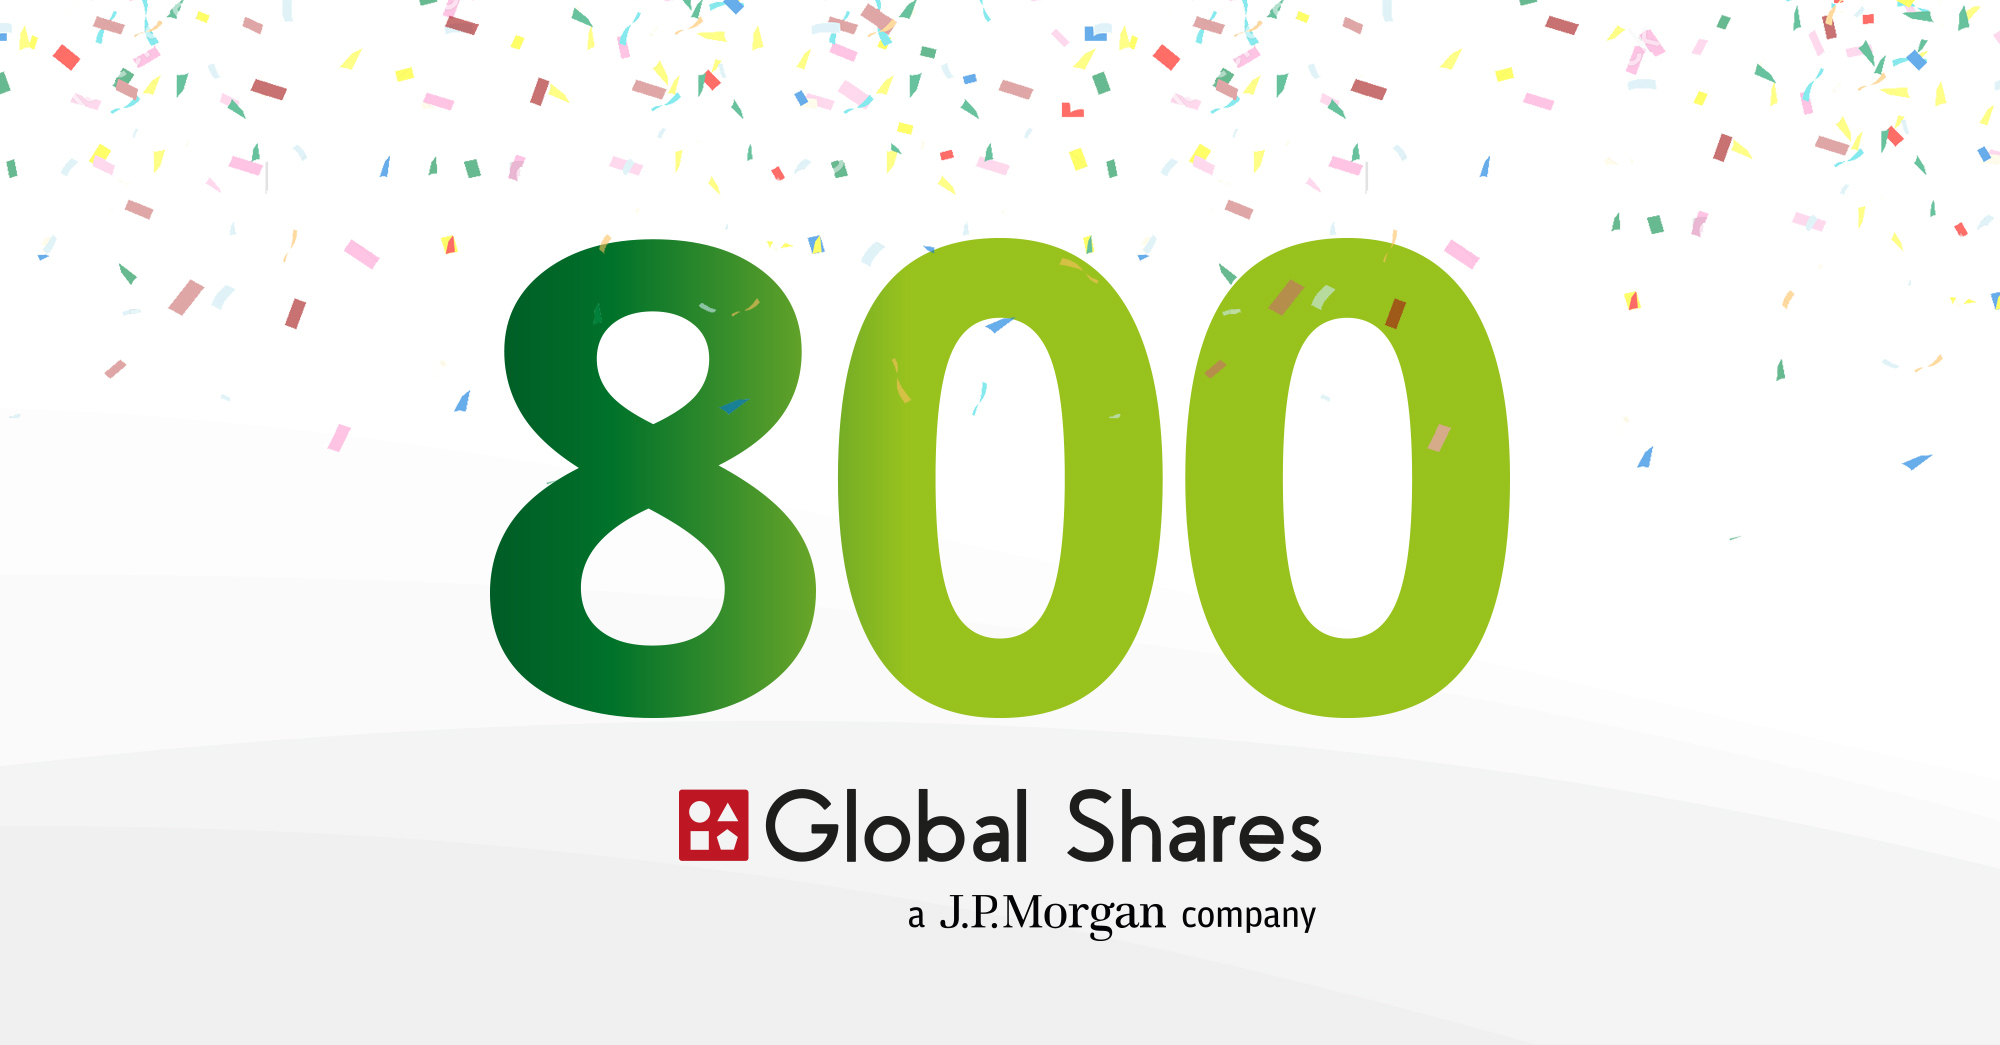 We’ve reached 800 employees!